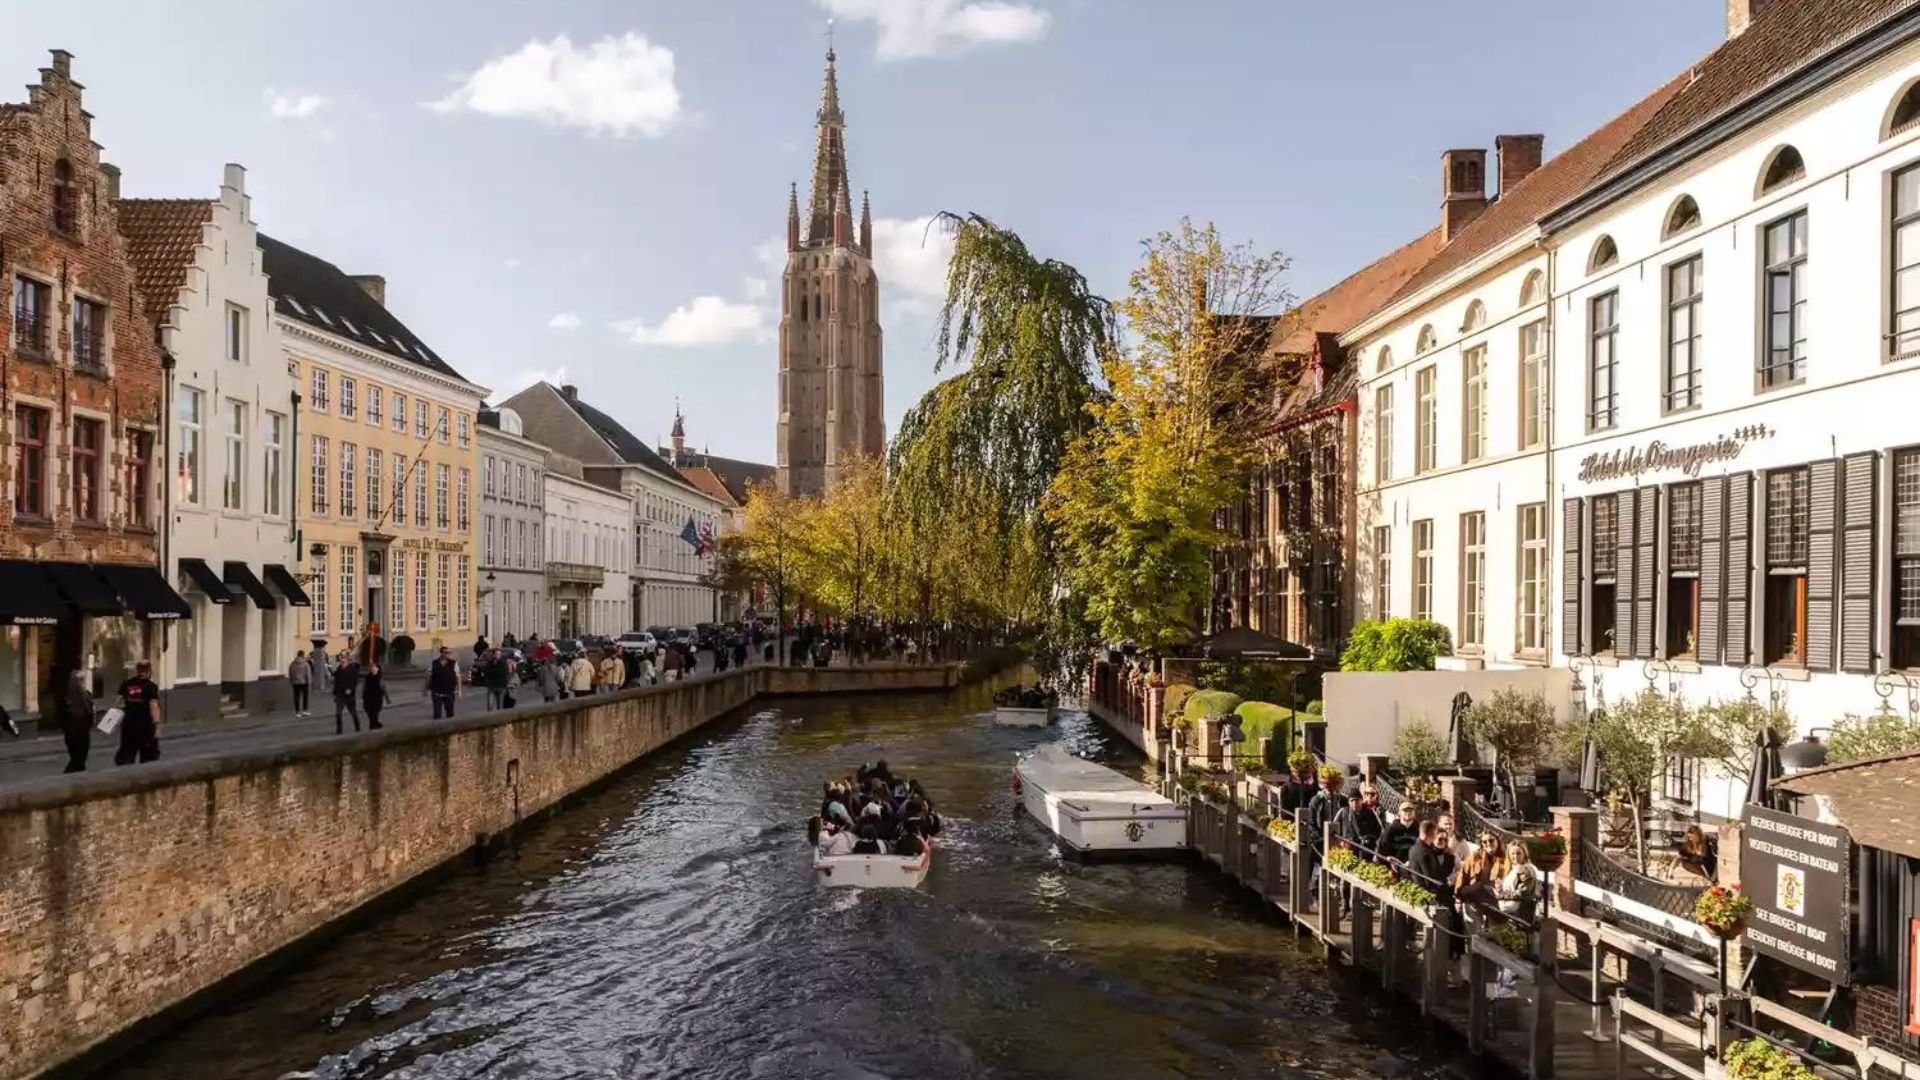 Bruges, Belgium, May Be The Most Photogenic City In Europe